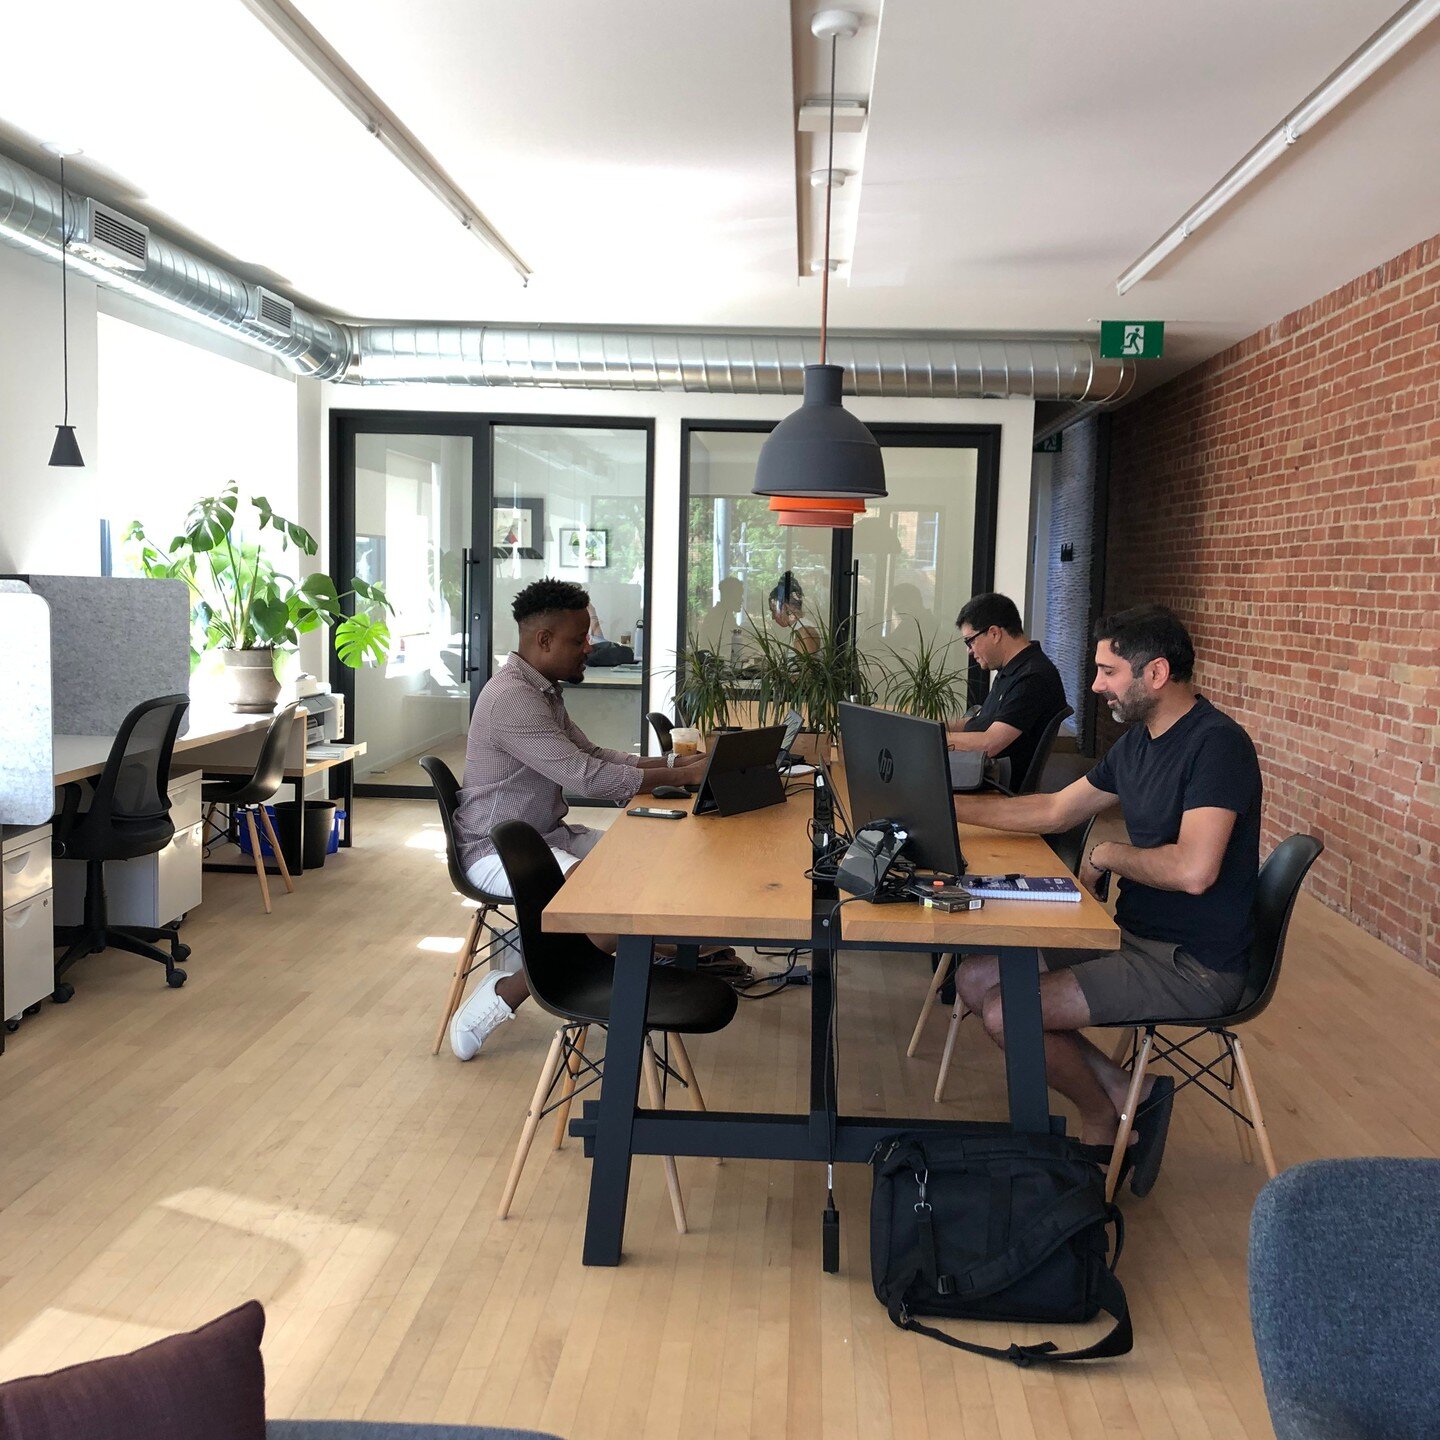 Calm in the workspace this morning just moments before the quiet went downhill with soccer talk. #FridayTalk ❤️ #coworkers #workforyourselfnotbyyourself 
.
.
.
#coworking #coworkingtoronto #torontocoworking #coworkingspace #coworkingcommunity #hotdes